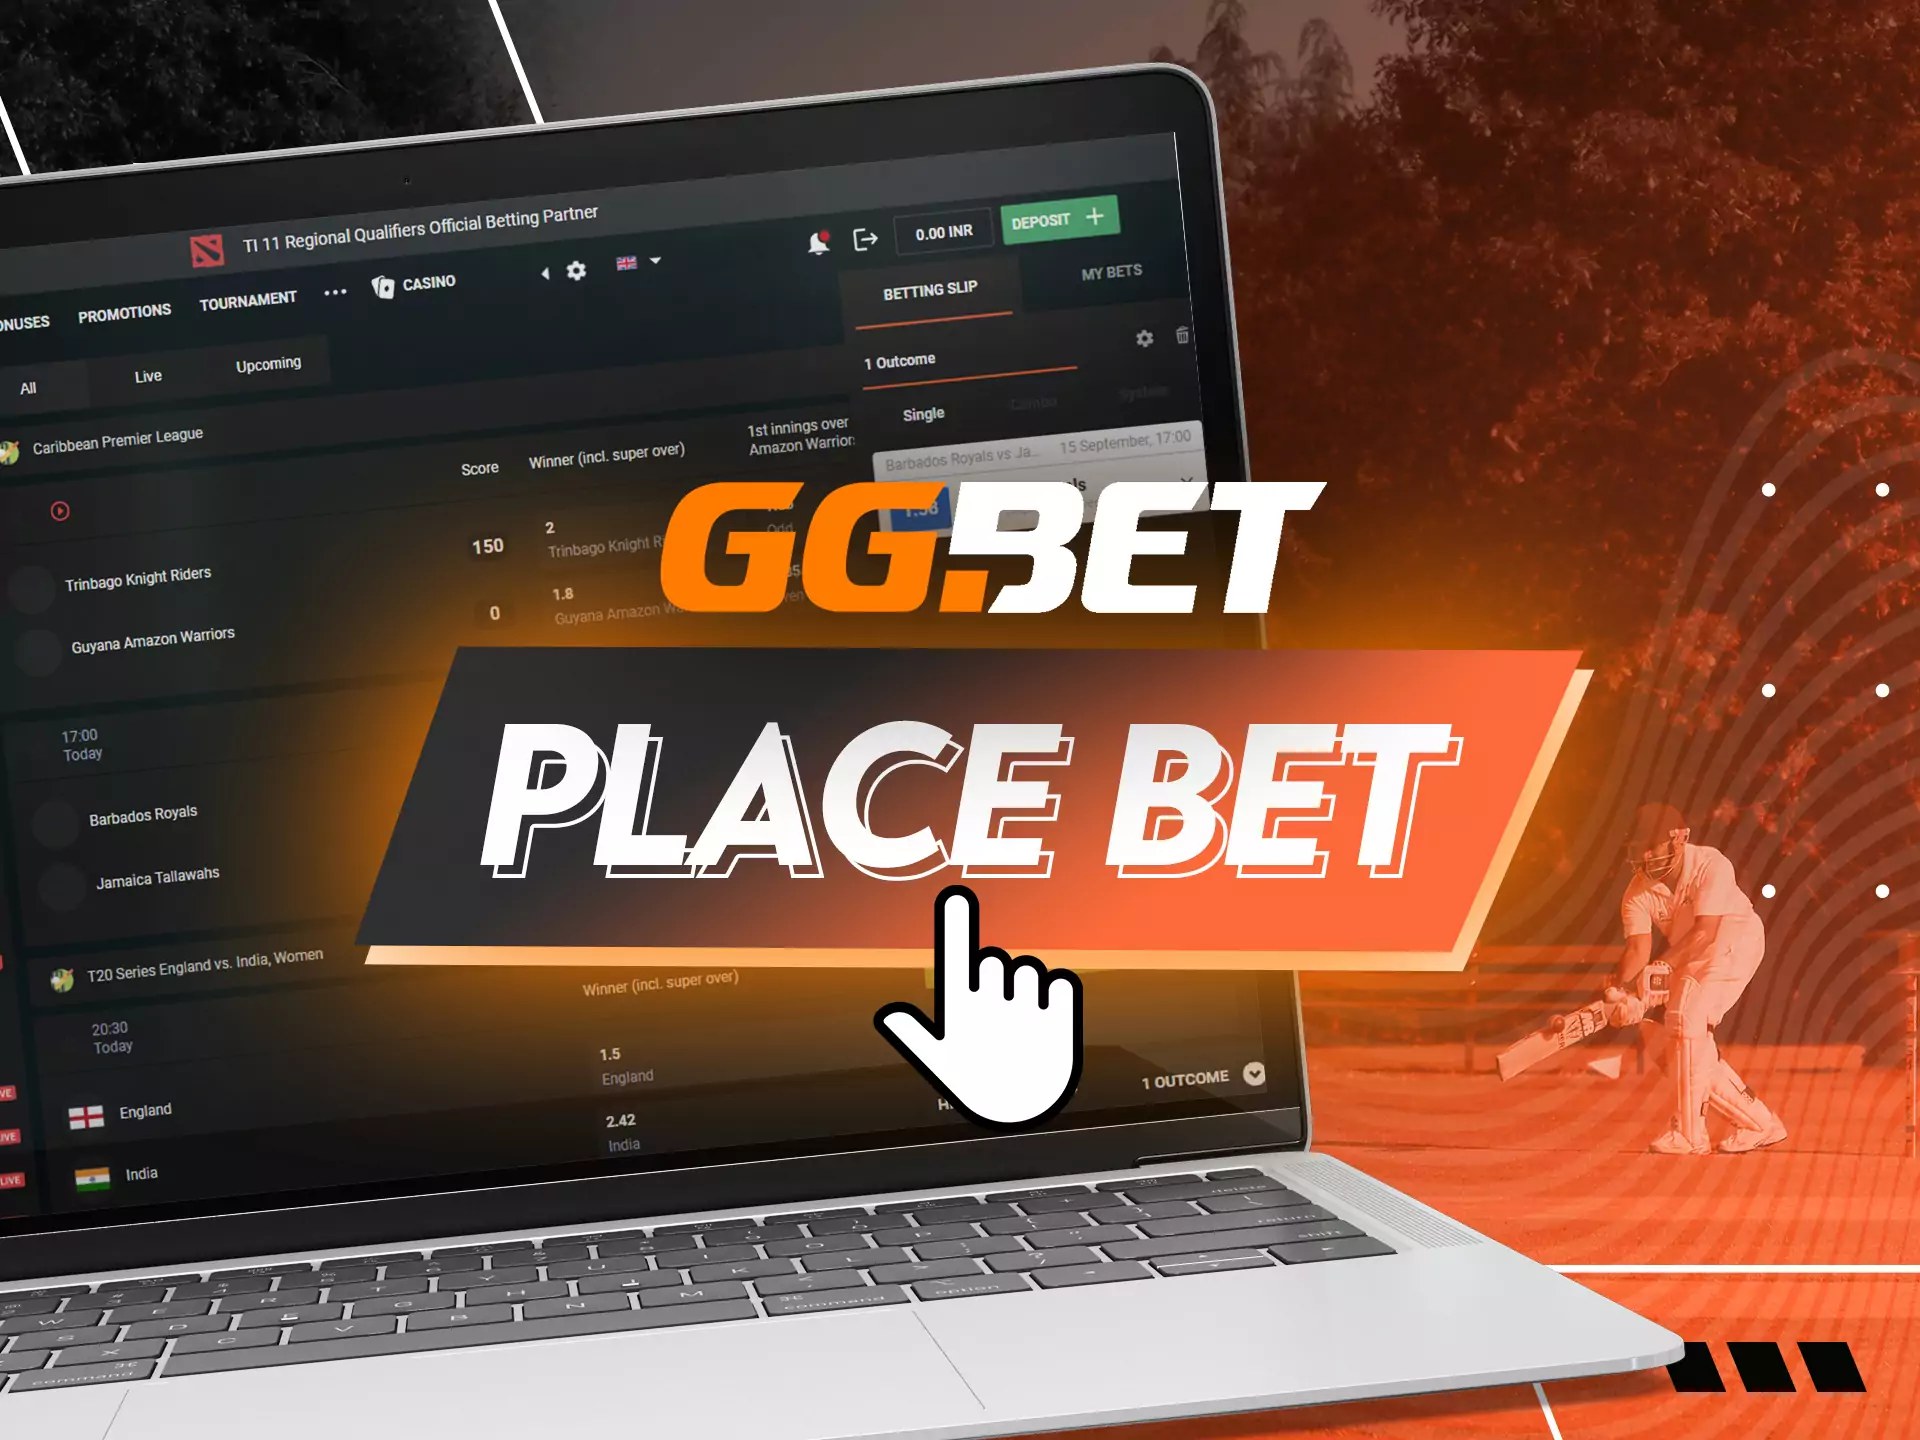 Choose a match, predict the outcome and place a bet on GGBet.